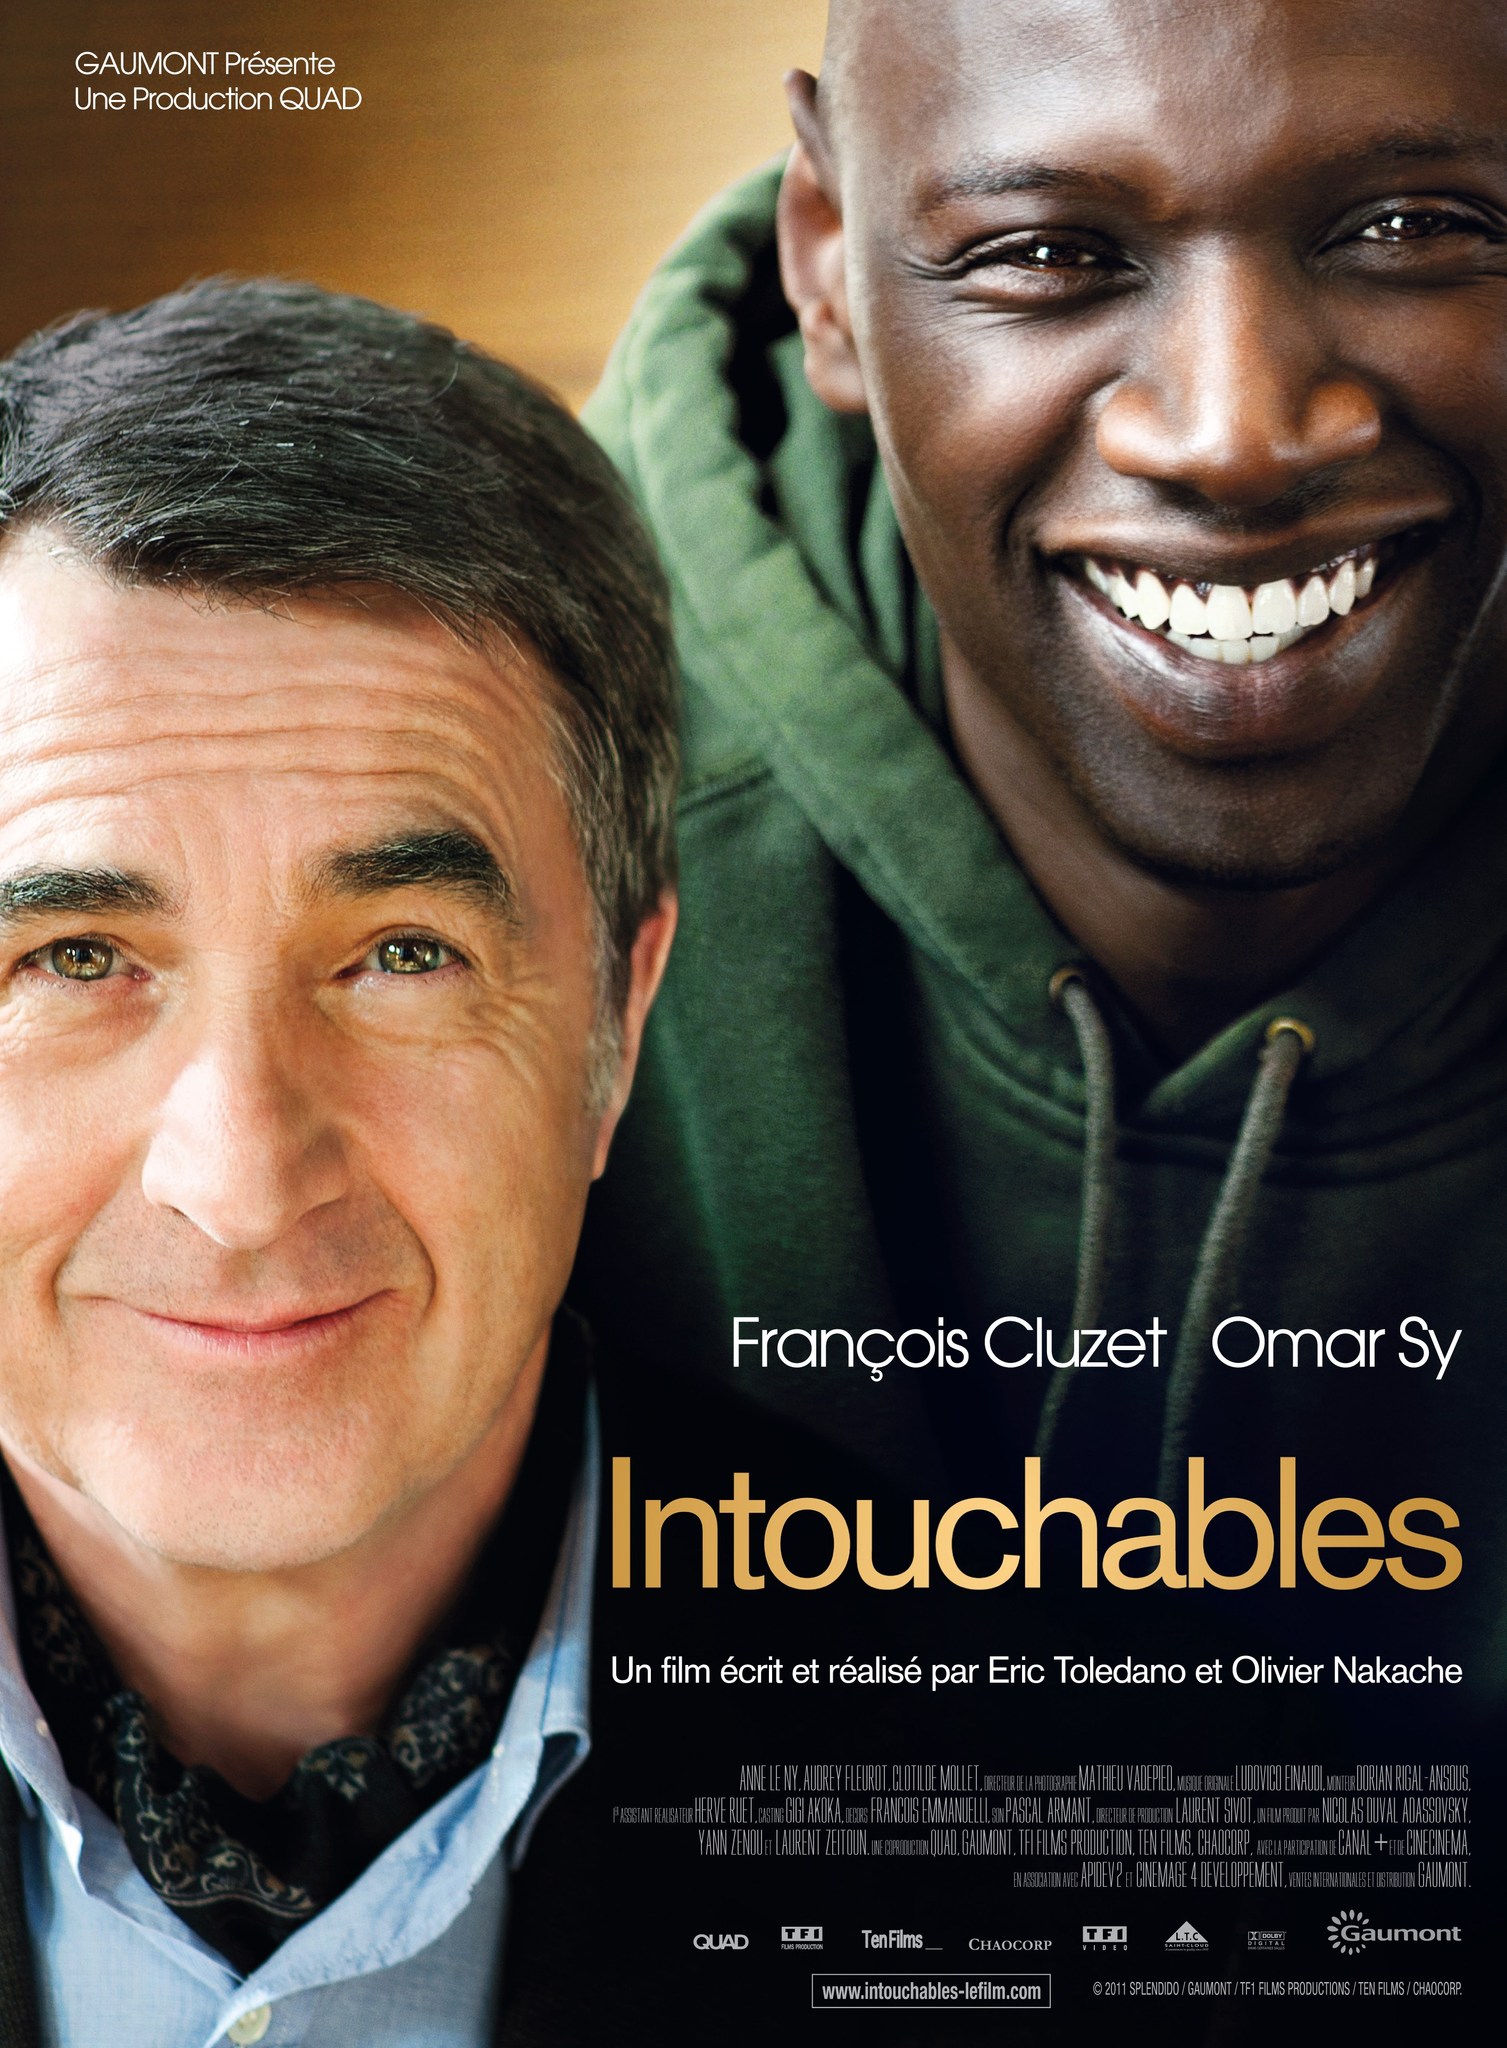 The Intouchables Photo Gallery